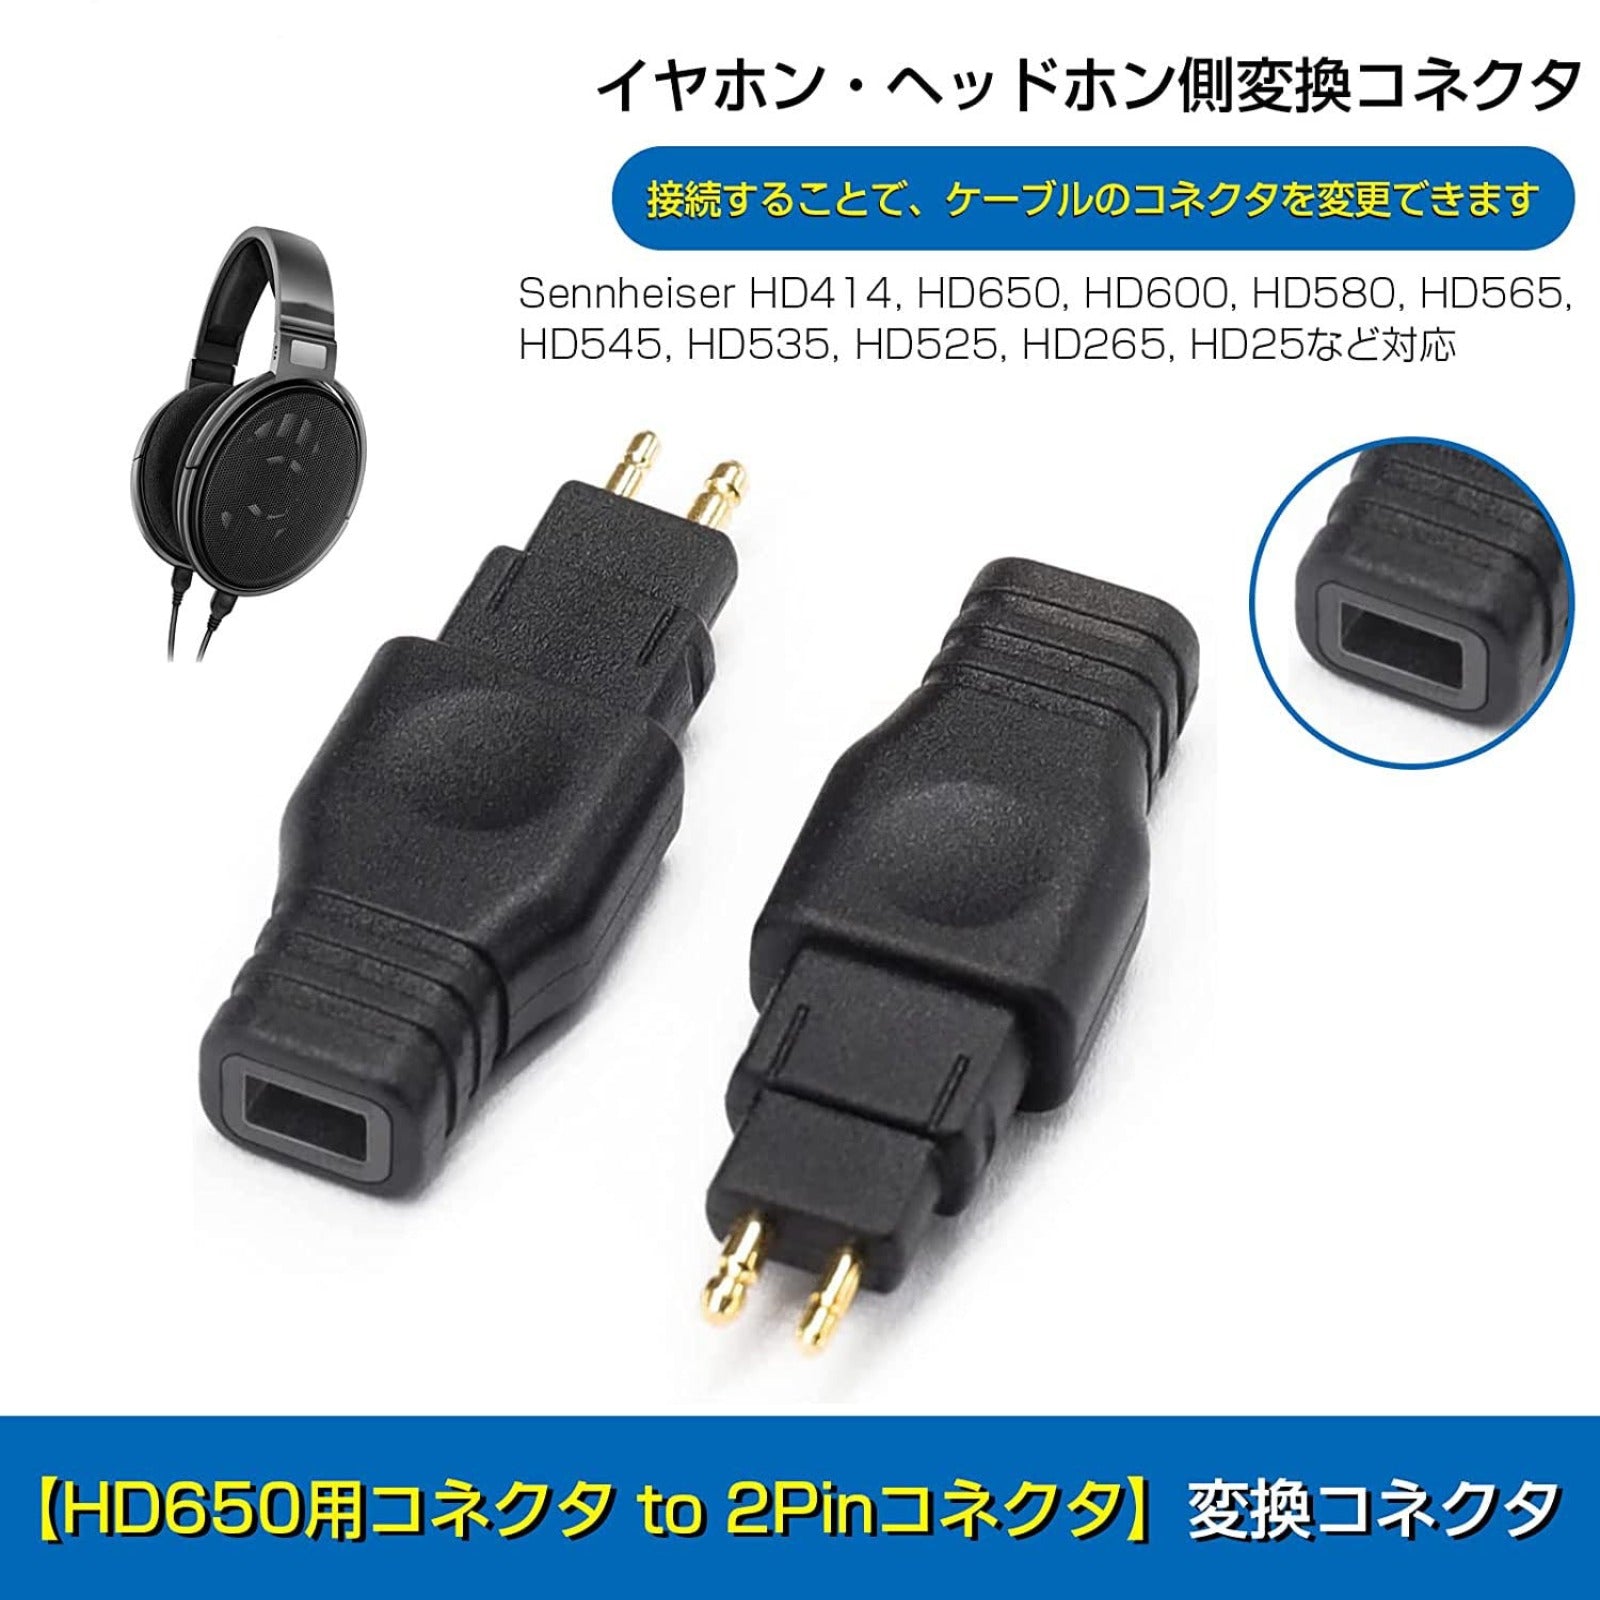 cooyin HD580-0.78mm 変換コネクター コネクターキット ゼンハイザー用 HD580（オス） to 2Pinコネクタ 0.7